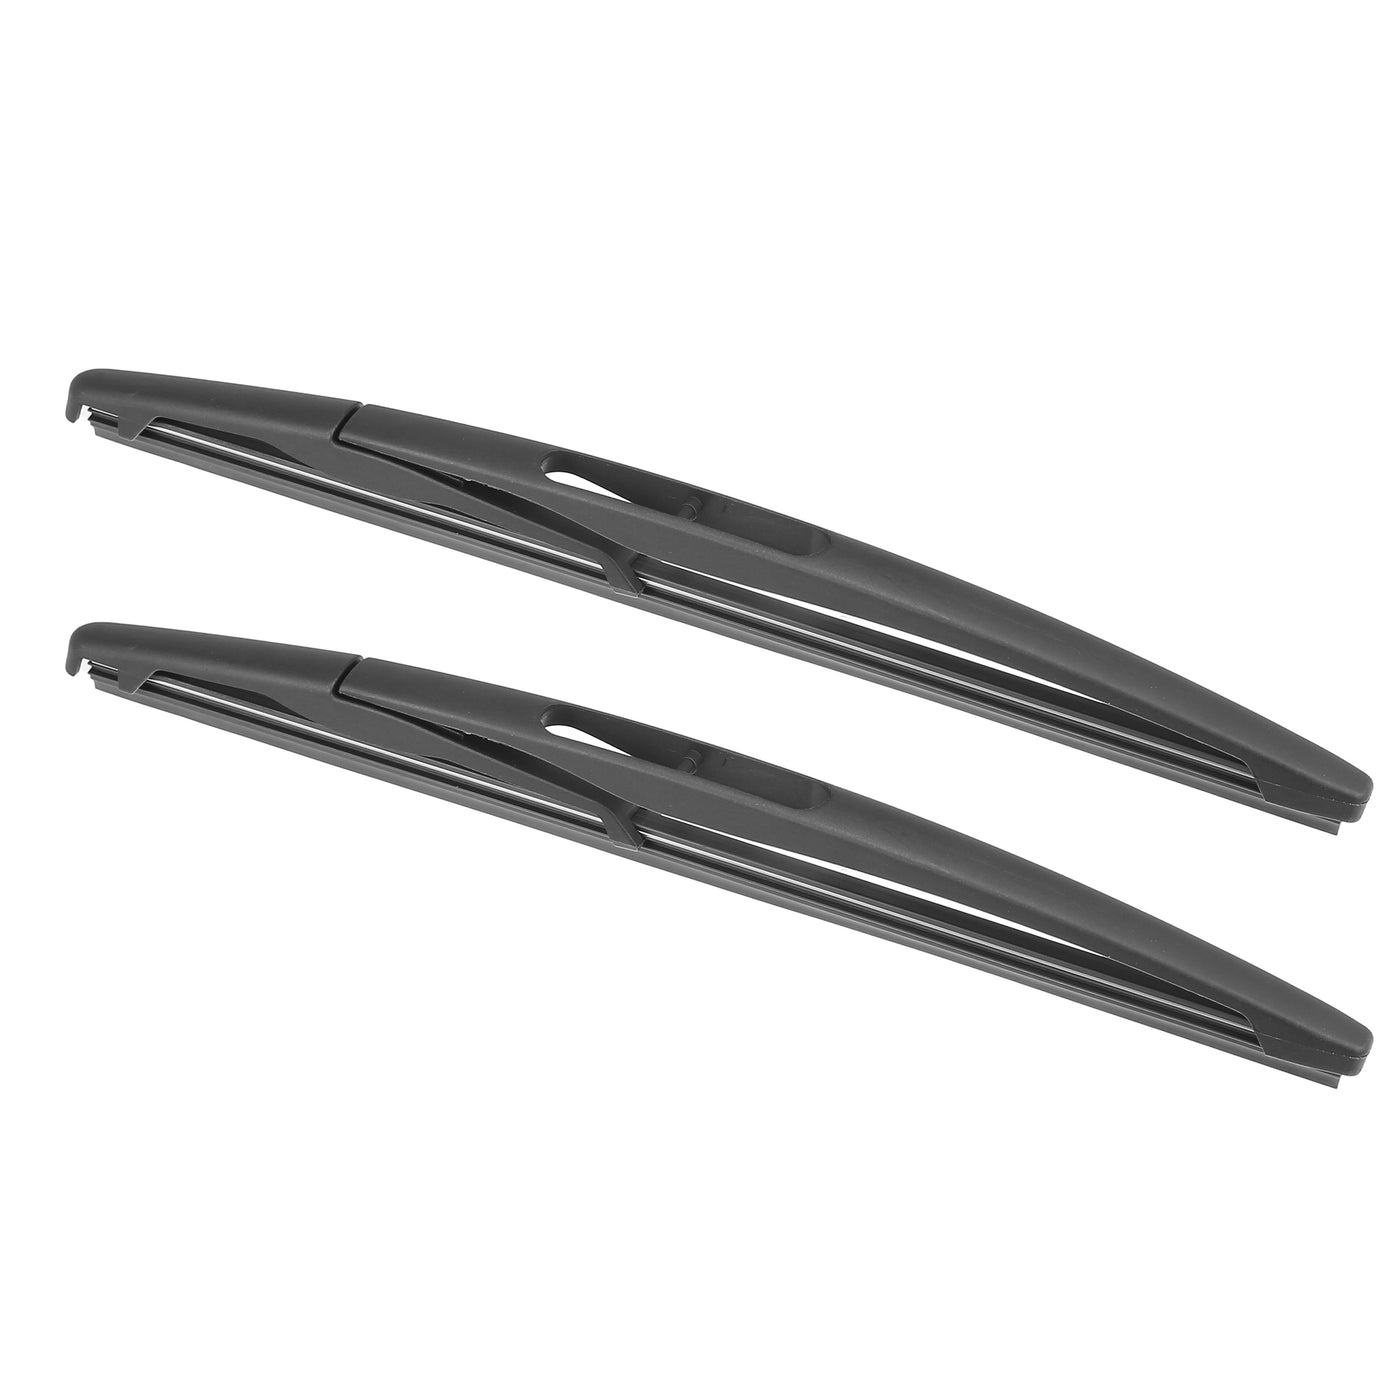 X AUTOHAUX 2pcs Rear Windshield Wiper Blade Replacement for GMC Acadia 2007-2012 for Chevrolet Aveo 2011-2016 for Chrysler 300 Touring 2005-2008